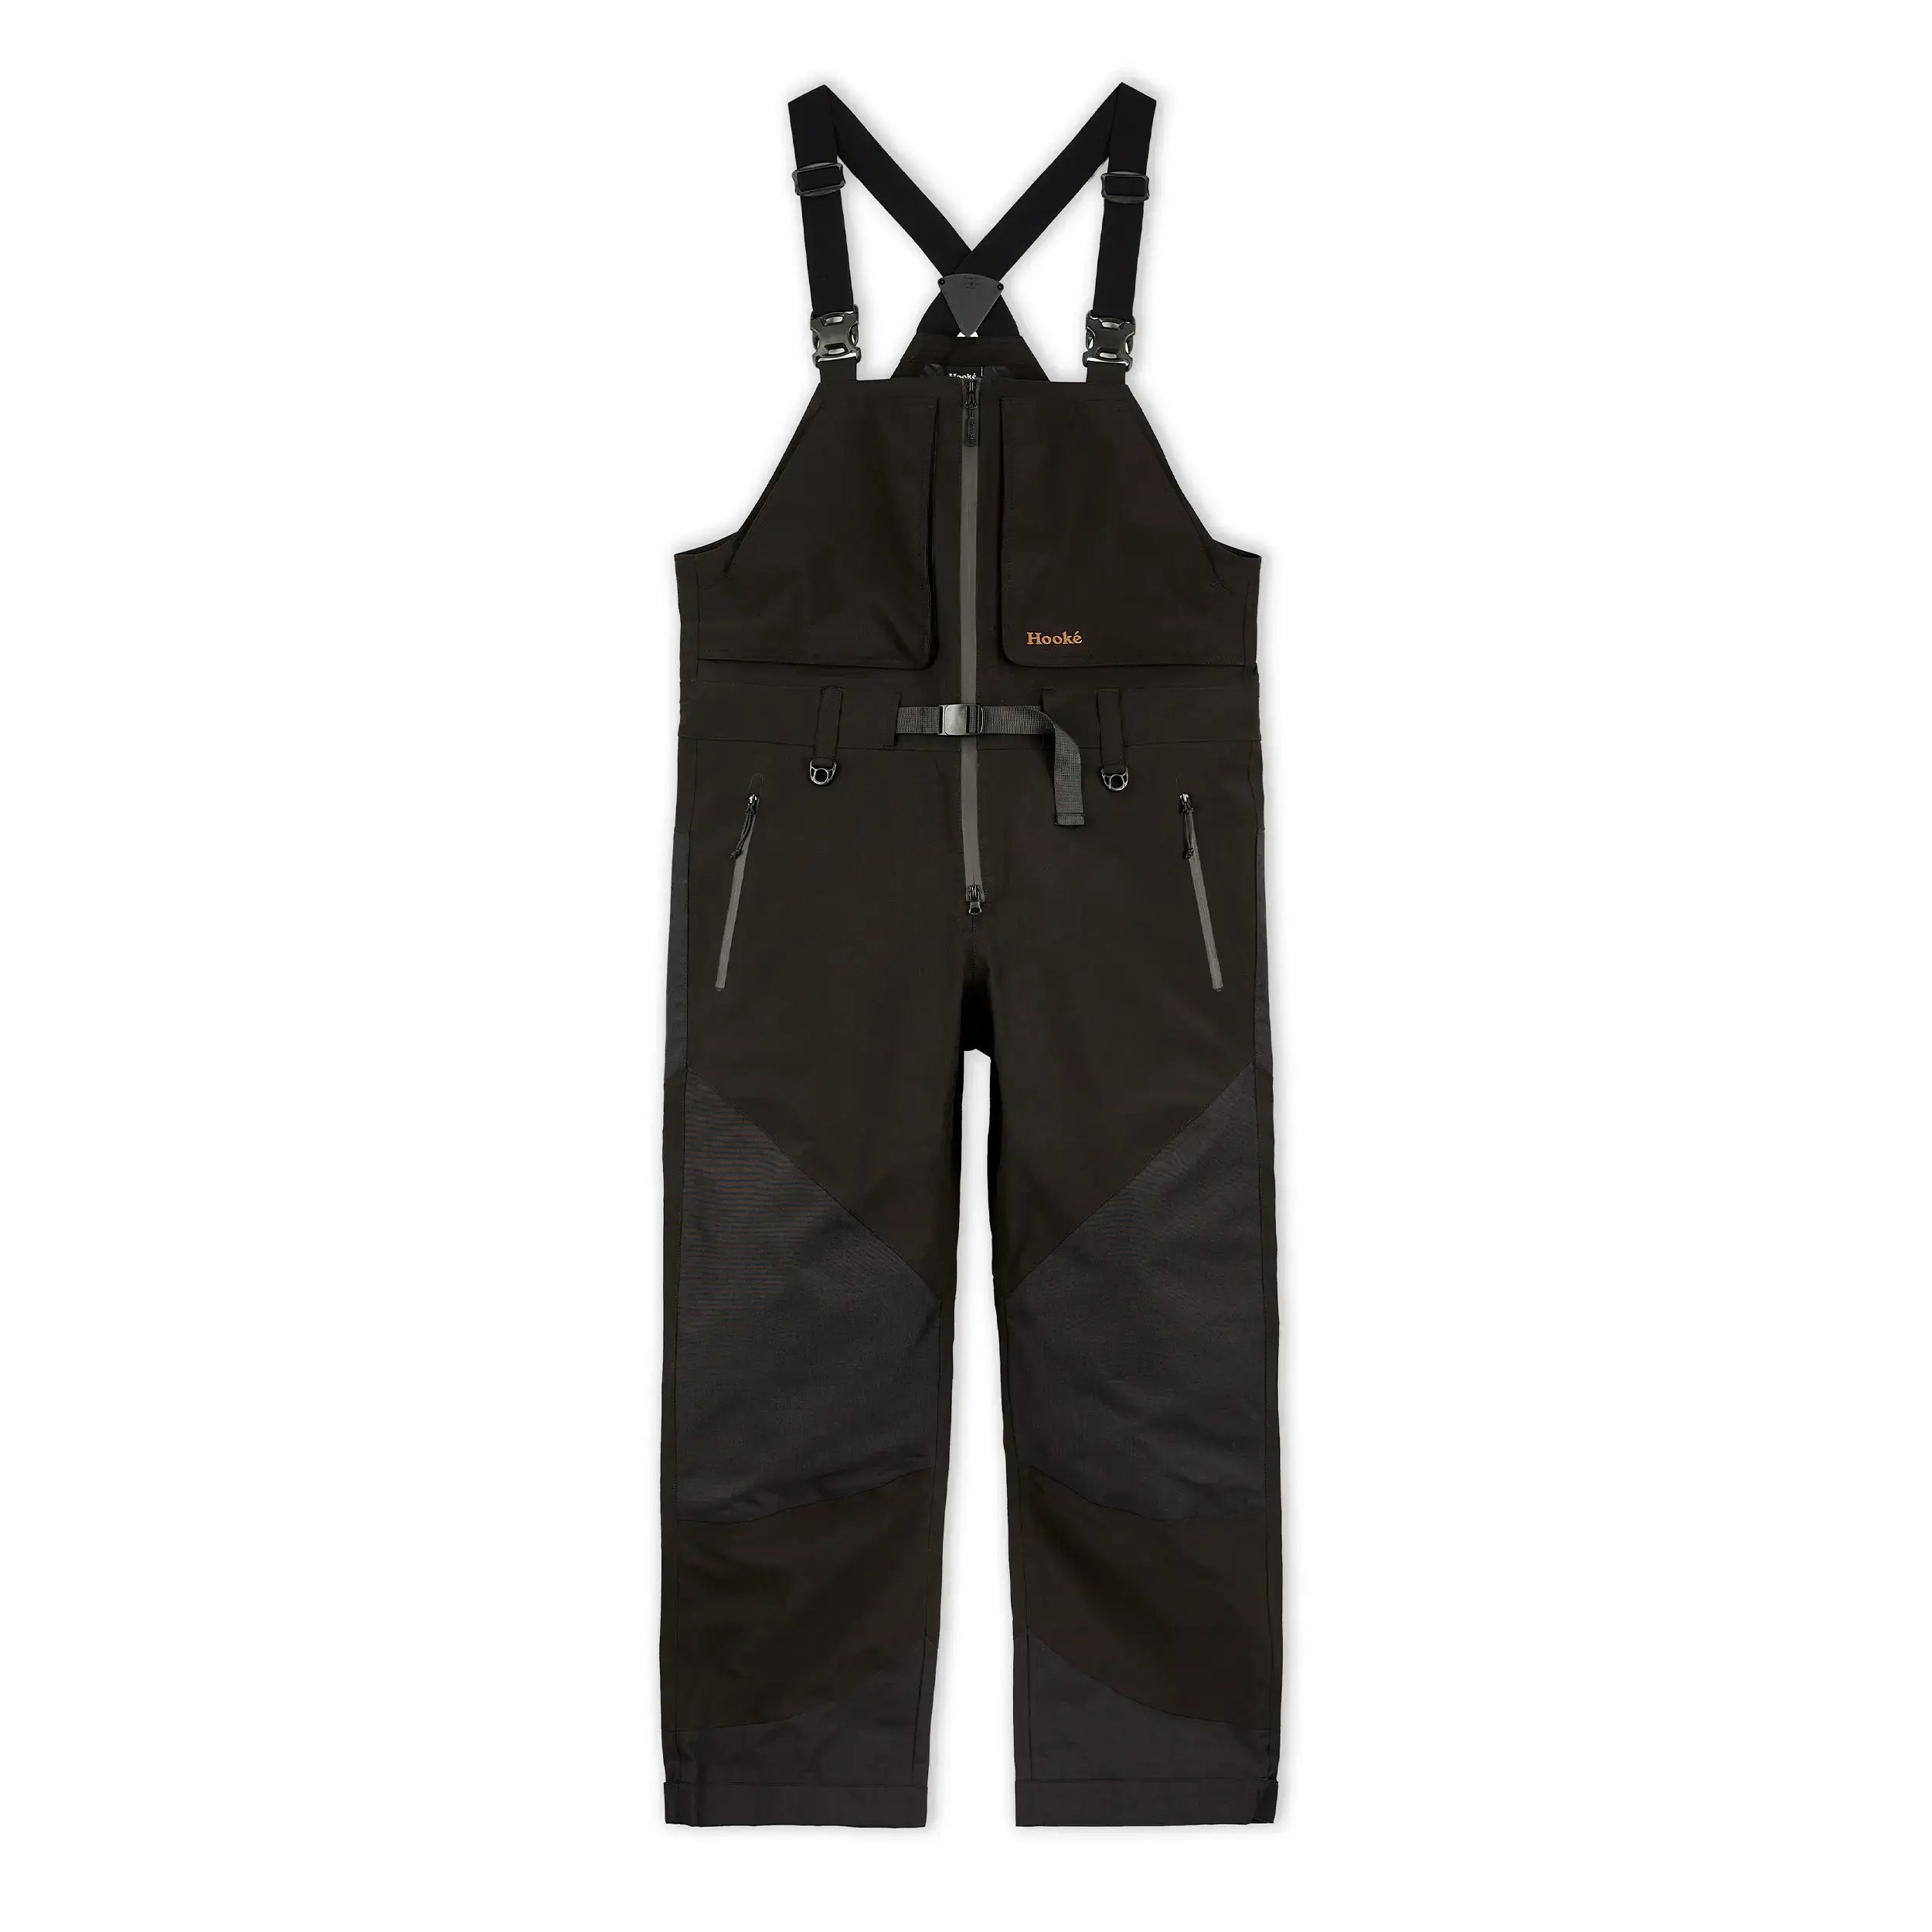 Fishing Waders for Men for sale in St. Louis